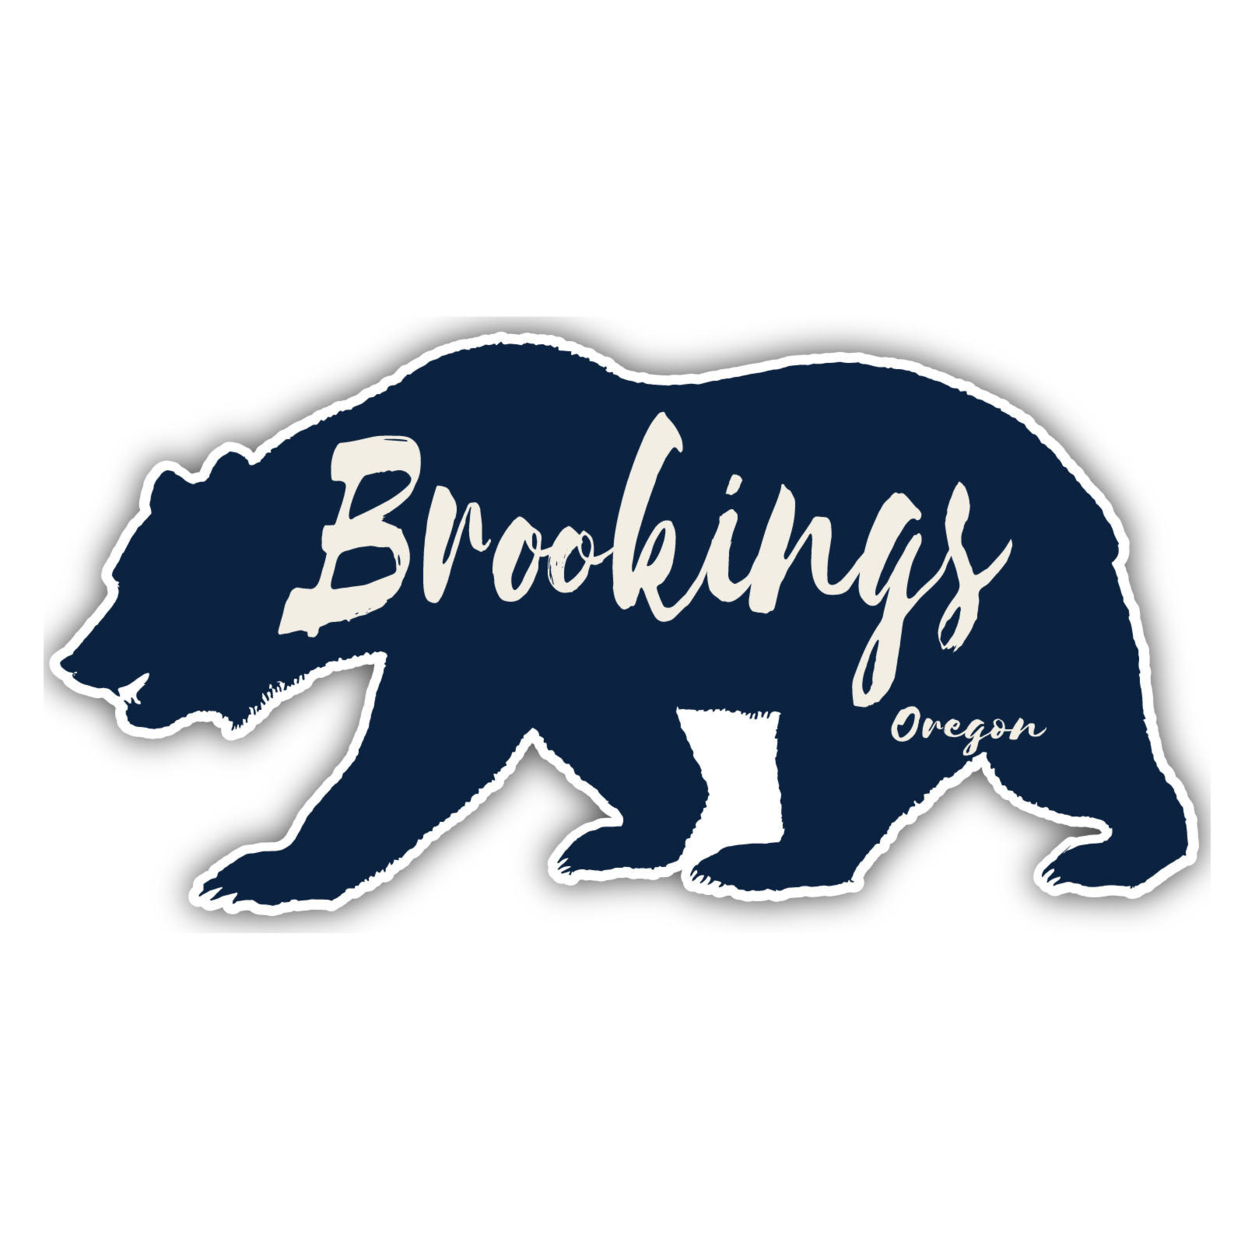 Brookings Oregon Souvenir Decorative Stickers (Choose Theme And Size) - 4-Pack, 12-Inch, Bear